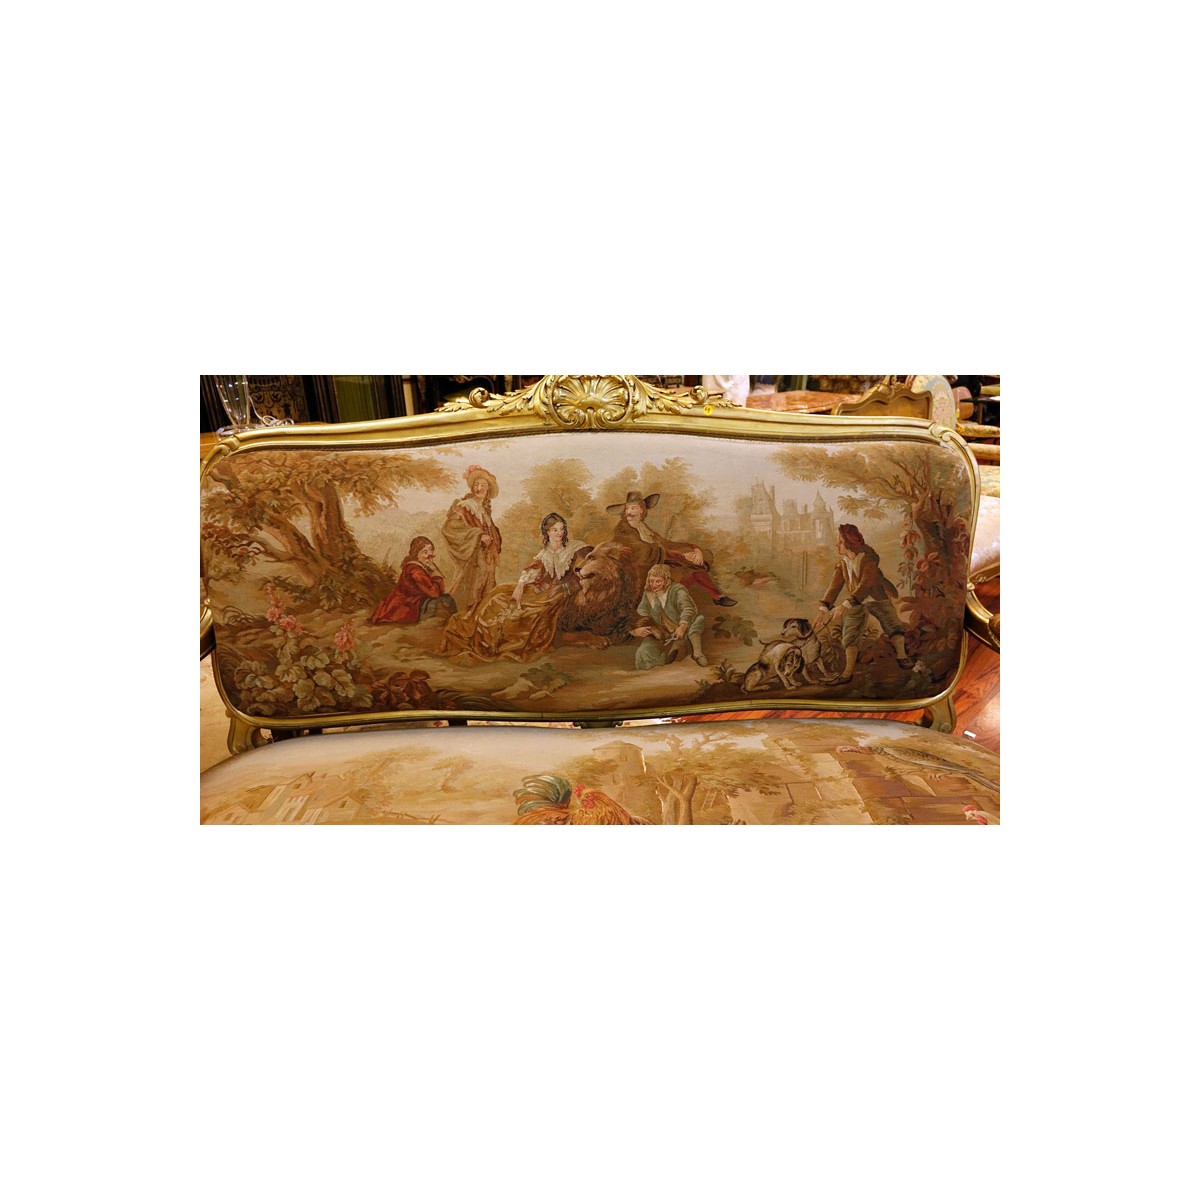 19th Century Louis XVI Style Carved Giltwood Settee with Aubusson Tapestry Upholstery. Depicts a ou